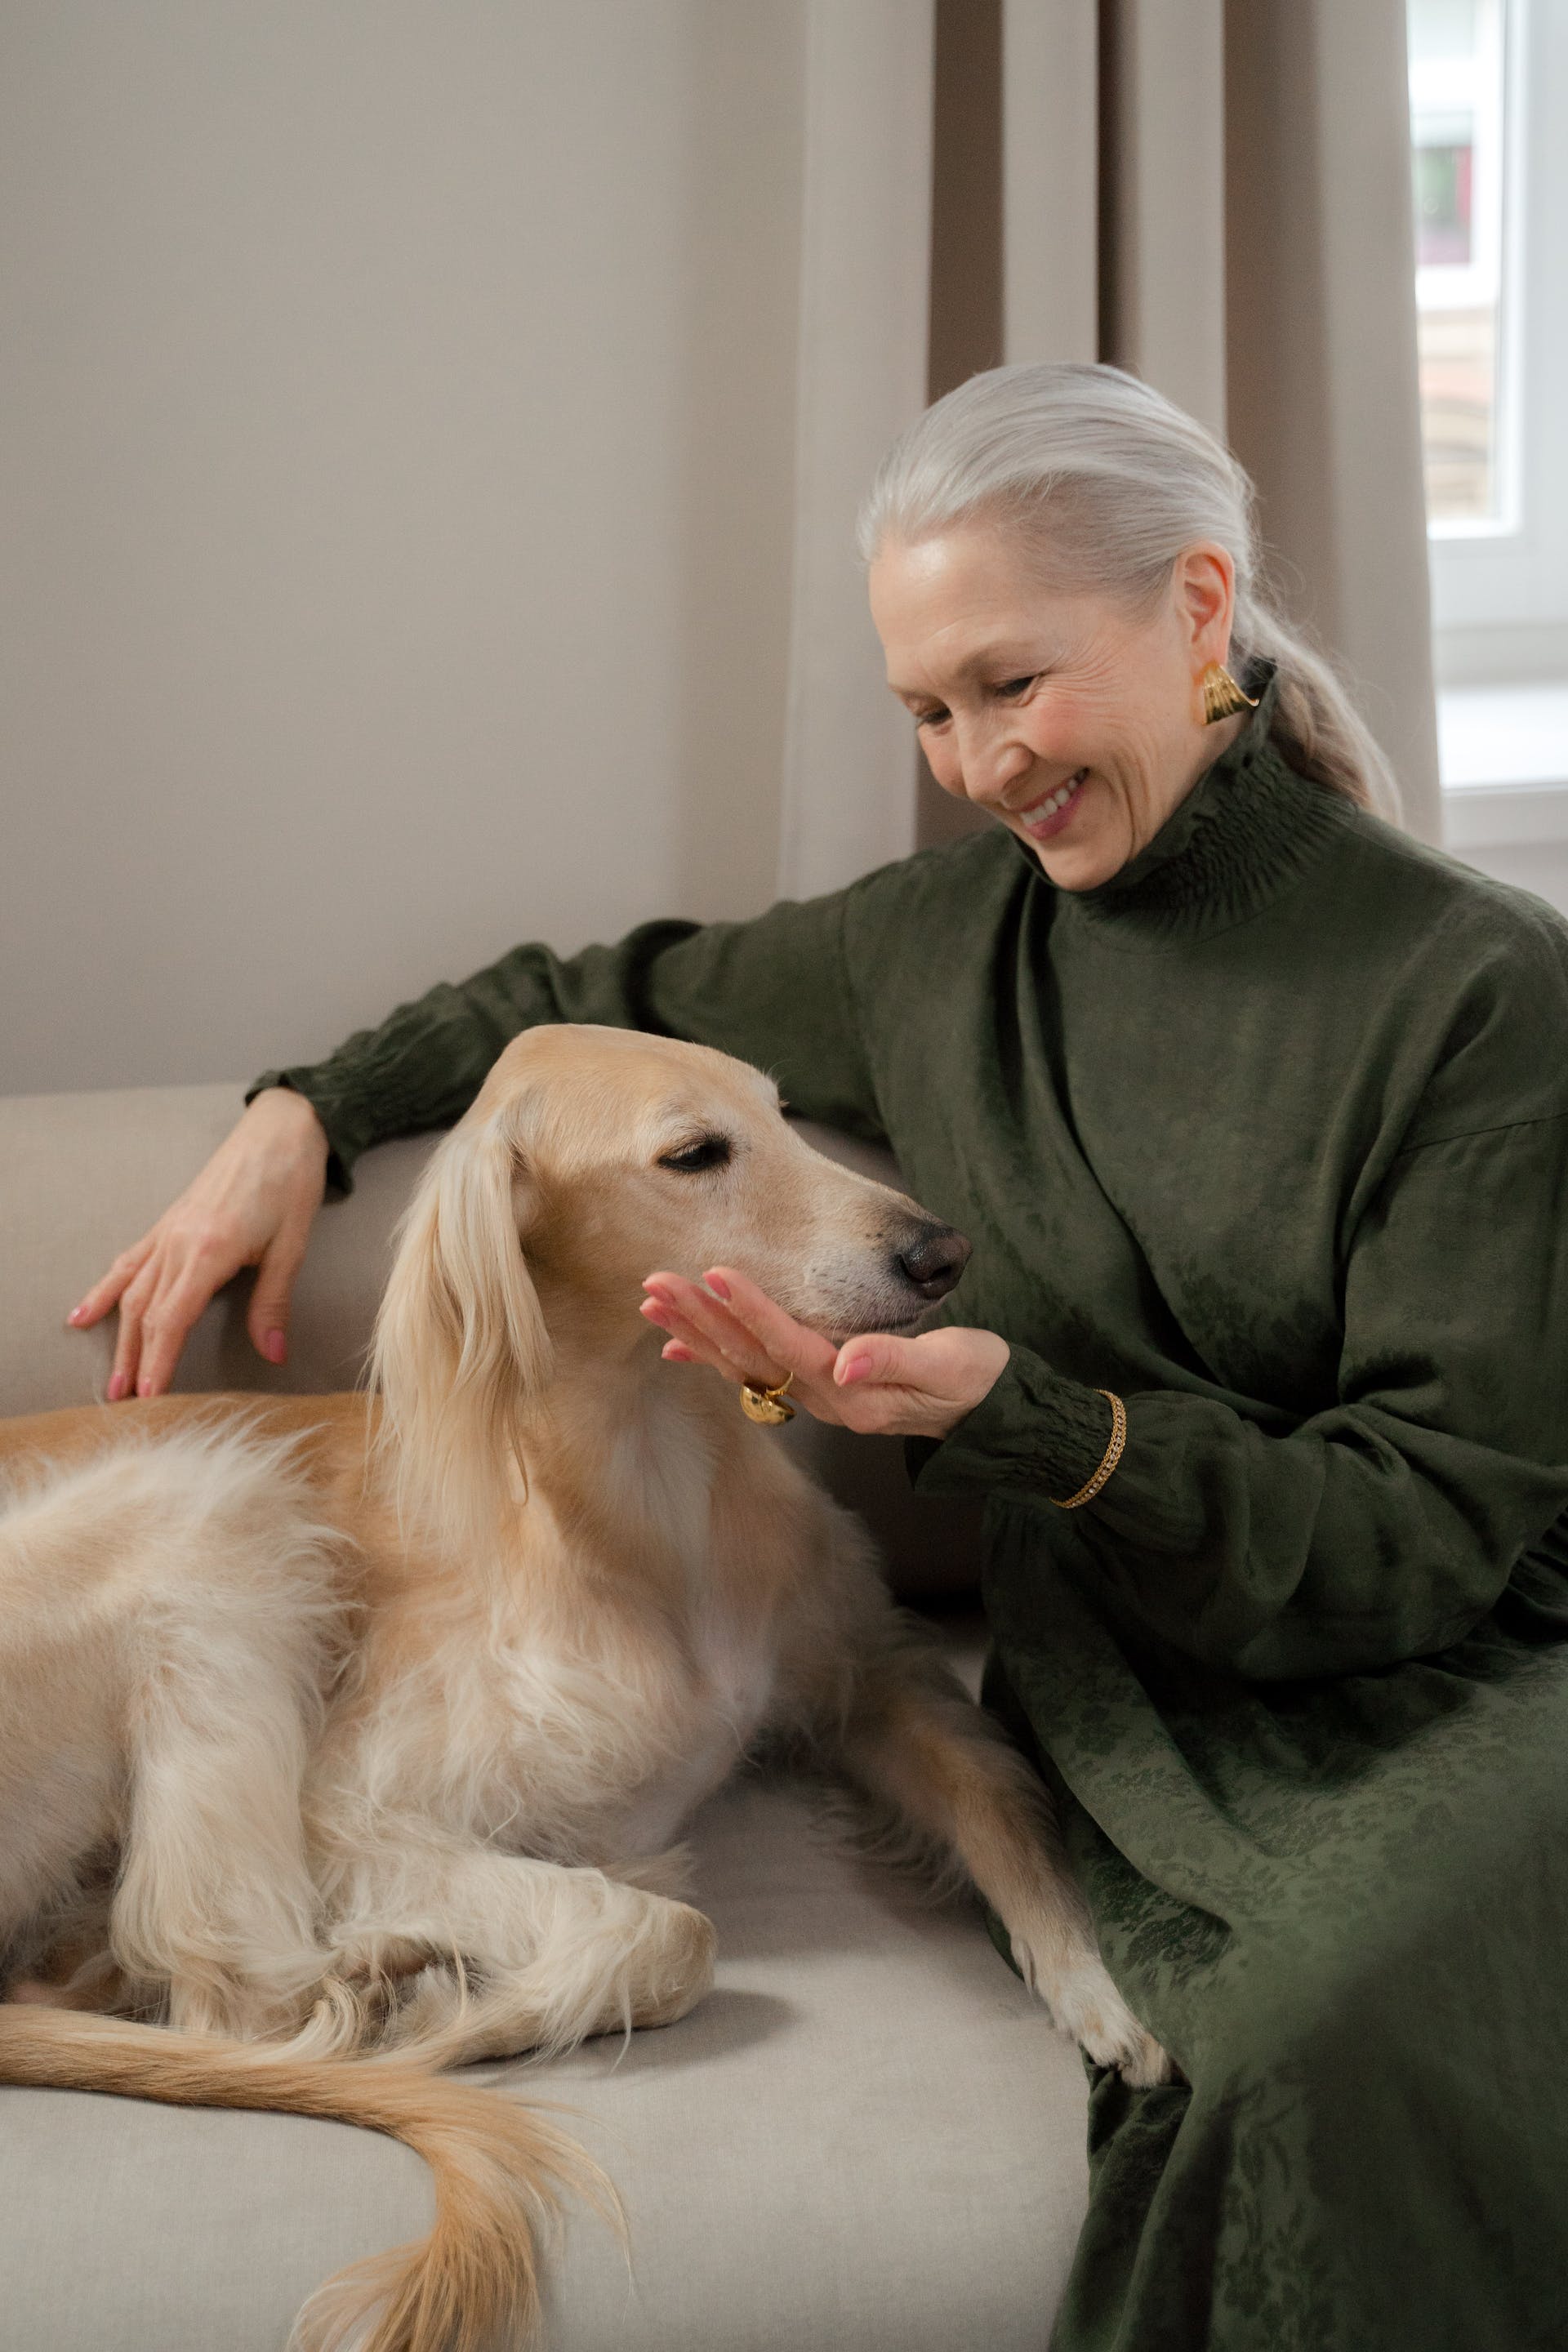 A senior woman spending time with her dog | Source: Pexels